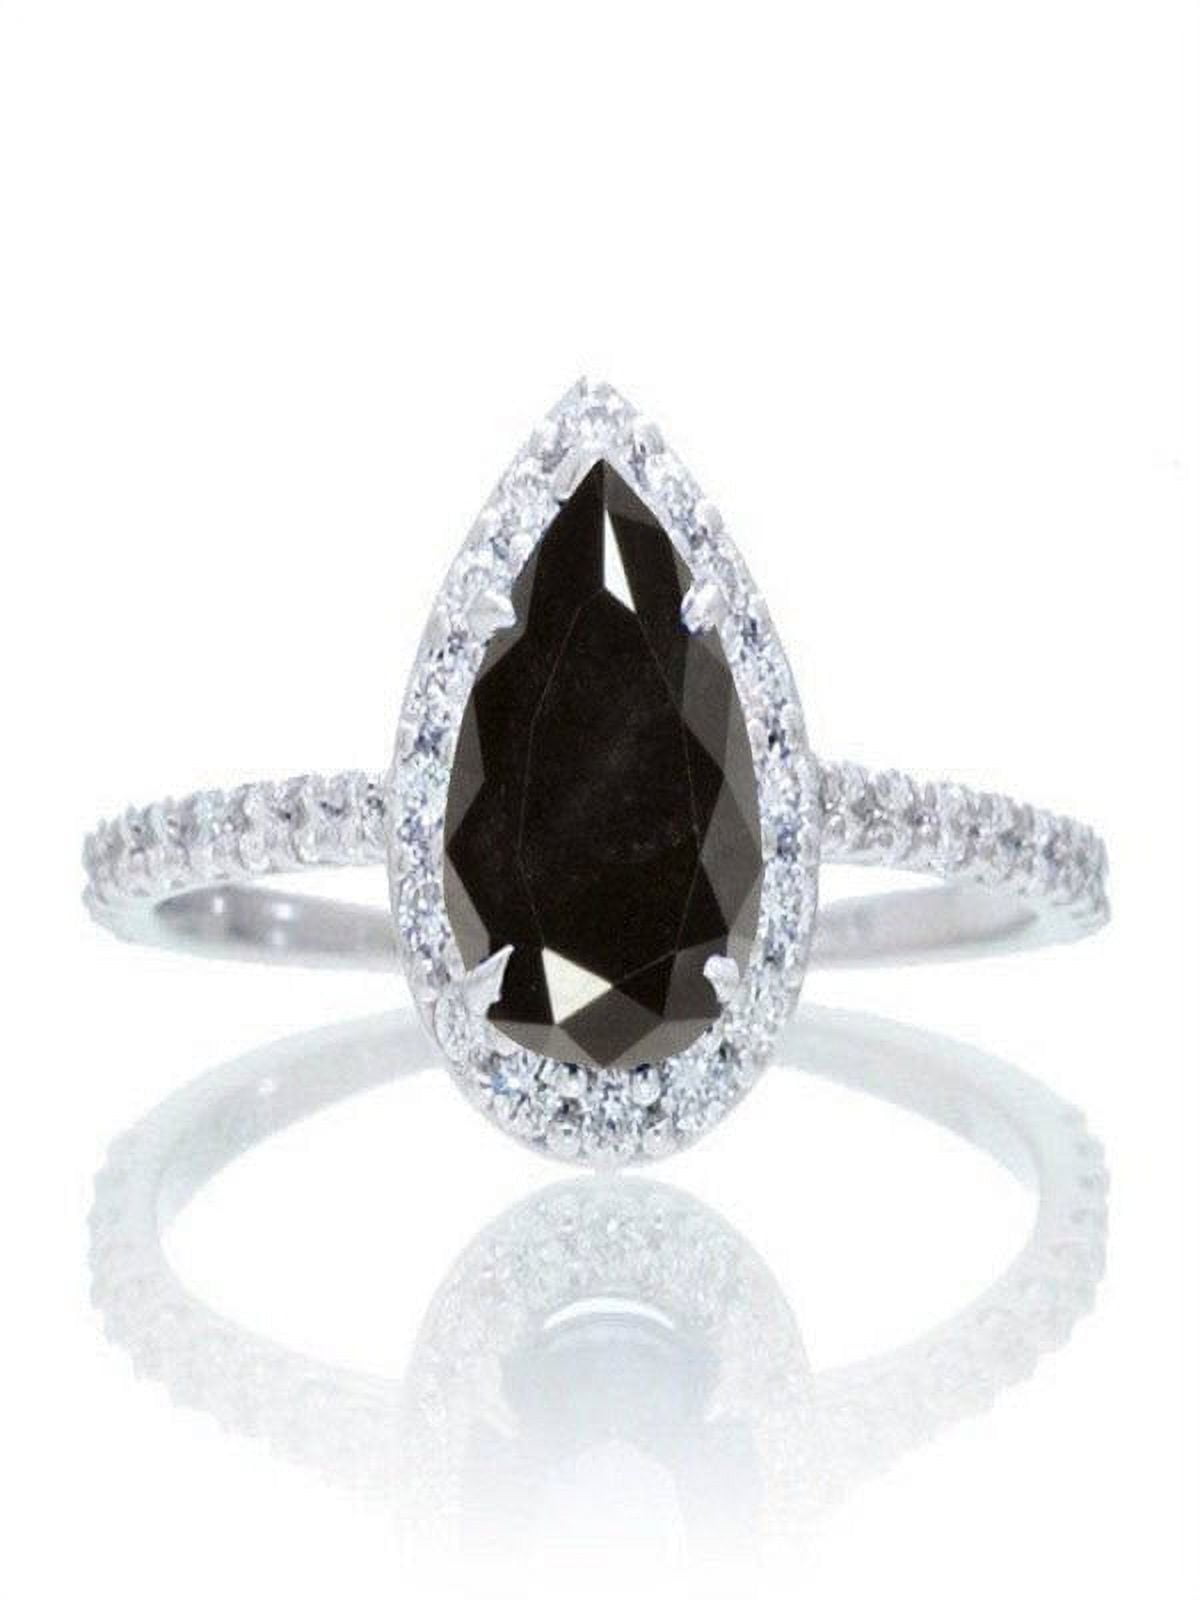 1 5 Carat Classic Pear Cut Black Diamond Moisssanite With Moissanite Celebrity Engagement Ring In 14K White Gold Promise Ring Anniversary ac750009 d359 4bea 94c8 a86b243d1f1d.3160ff1f9998fc3ec195a81851d68219